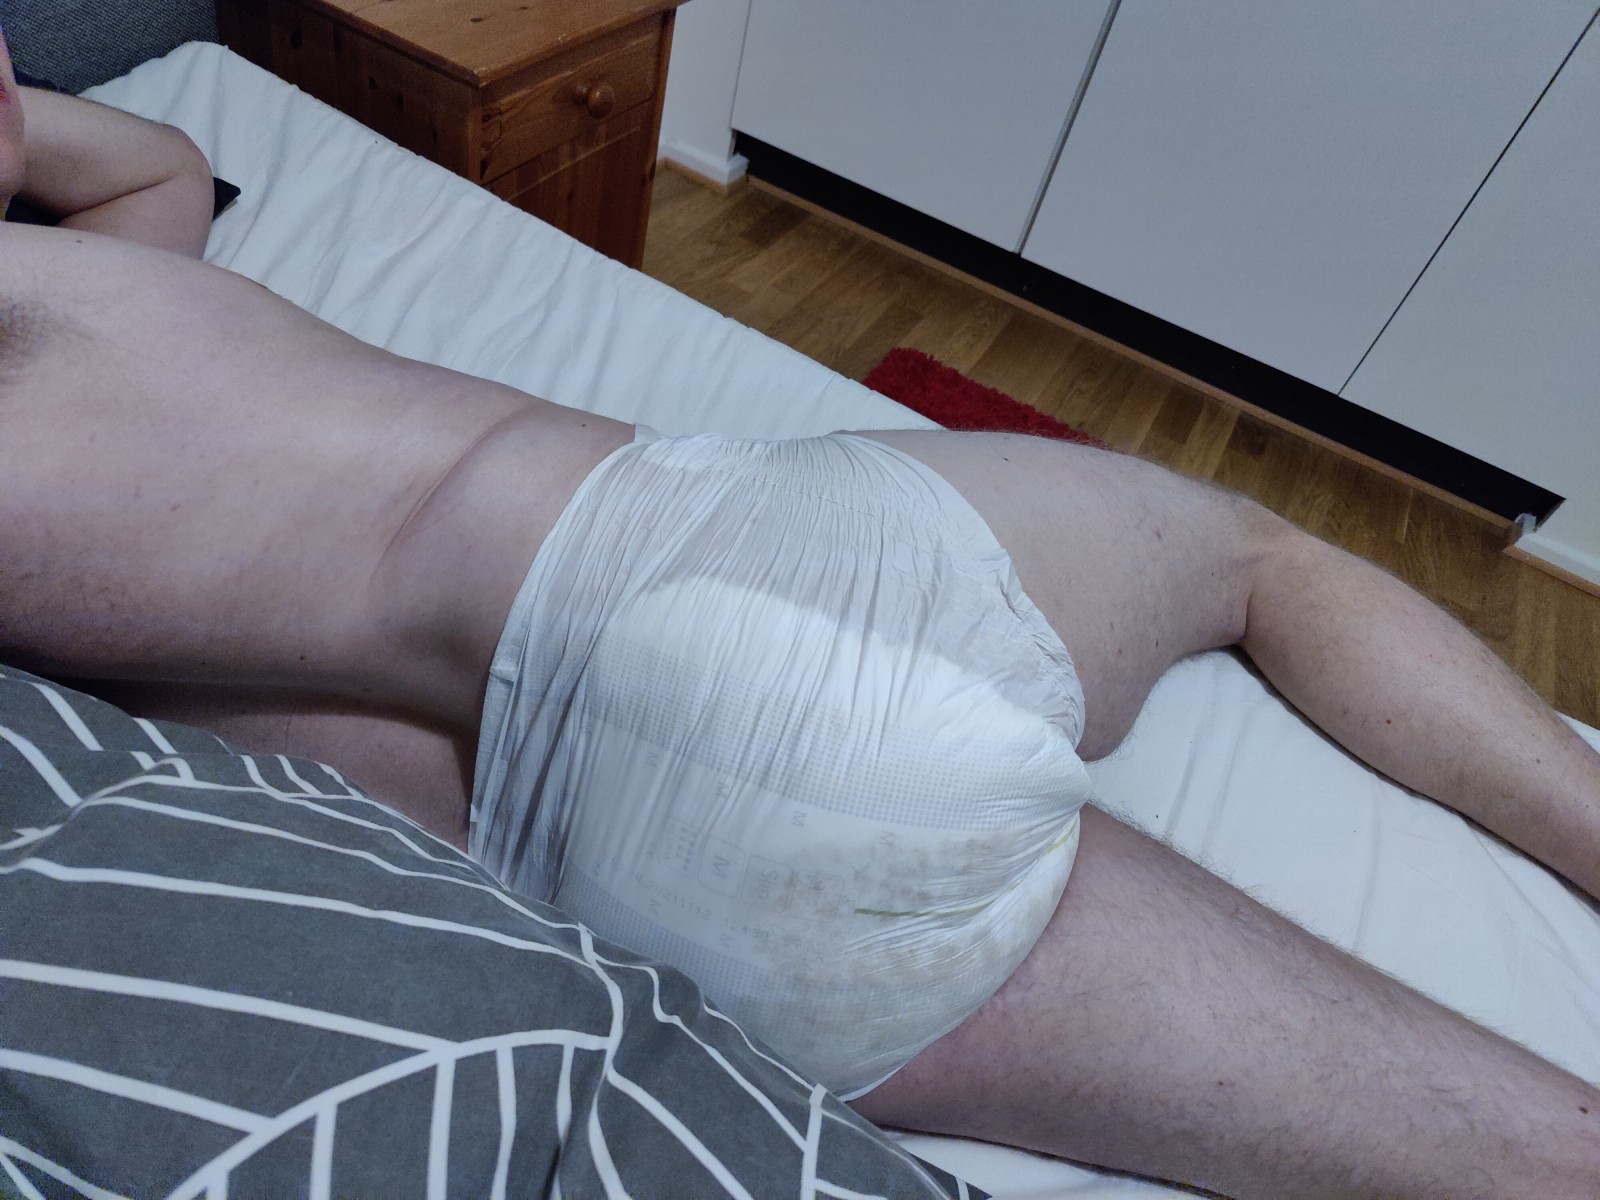 <p>Always nice to get padded after a night out. Then I don't have to get up in the morning</p>